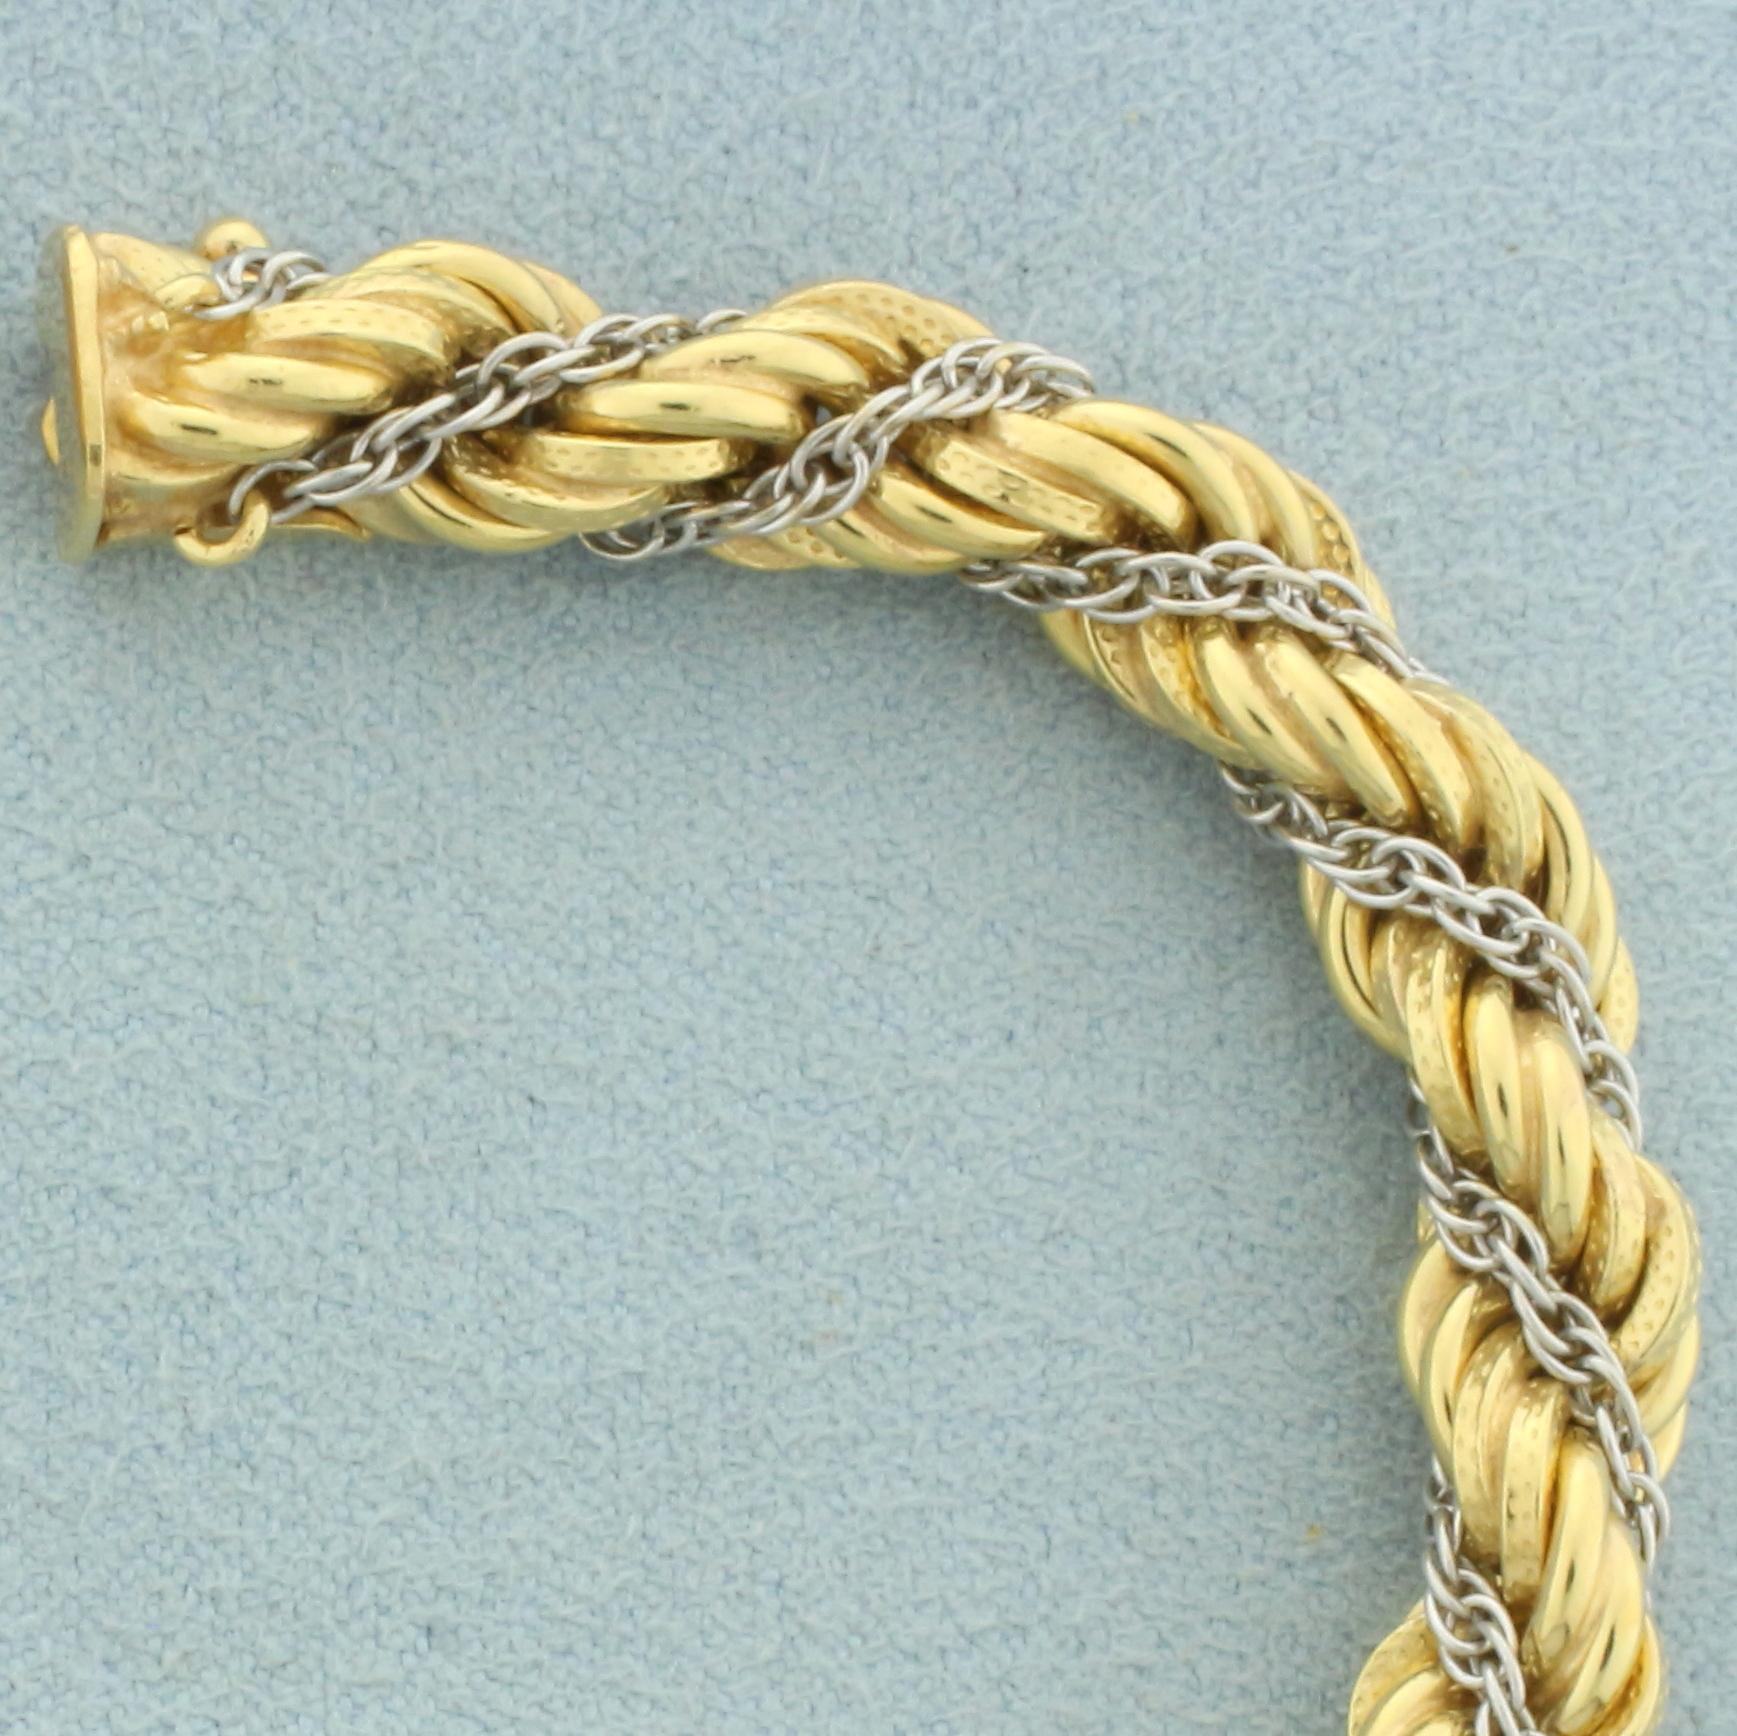 Italian Two Tone Rope Link Bracelet In 18k Yellow And White Gold